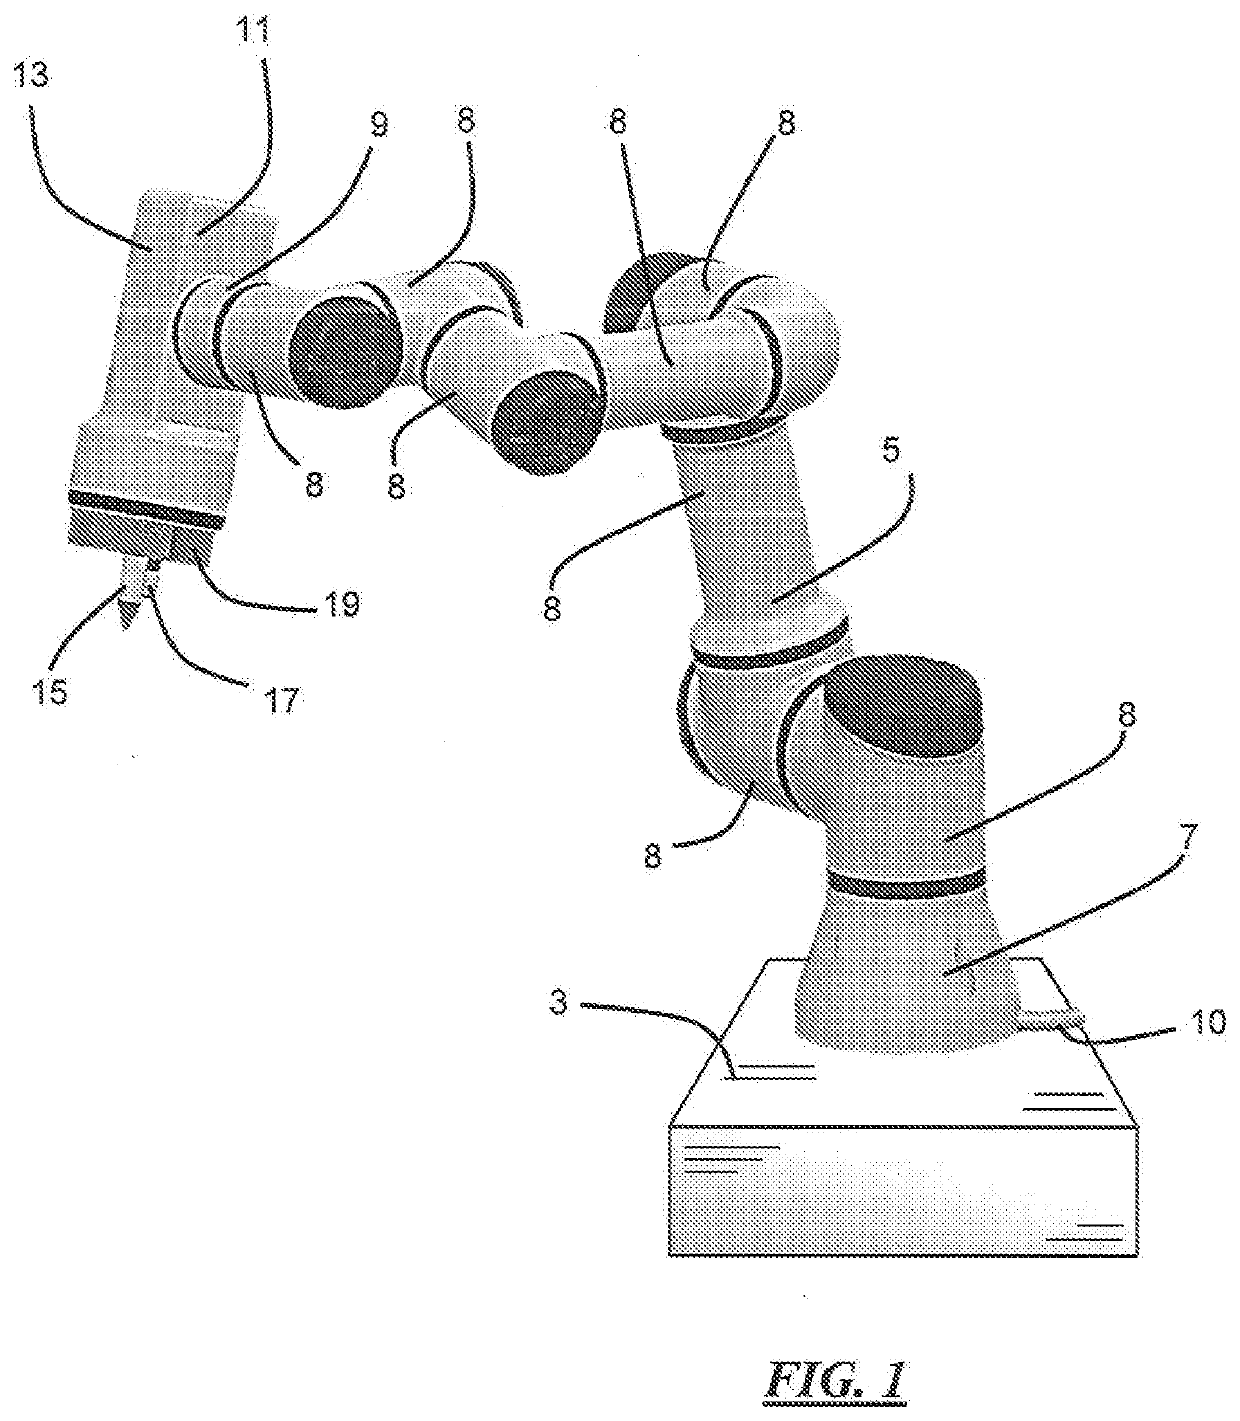 Robotic medical apparatus, system, and method